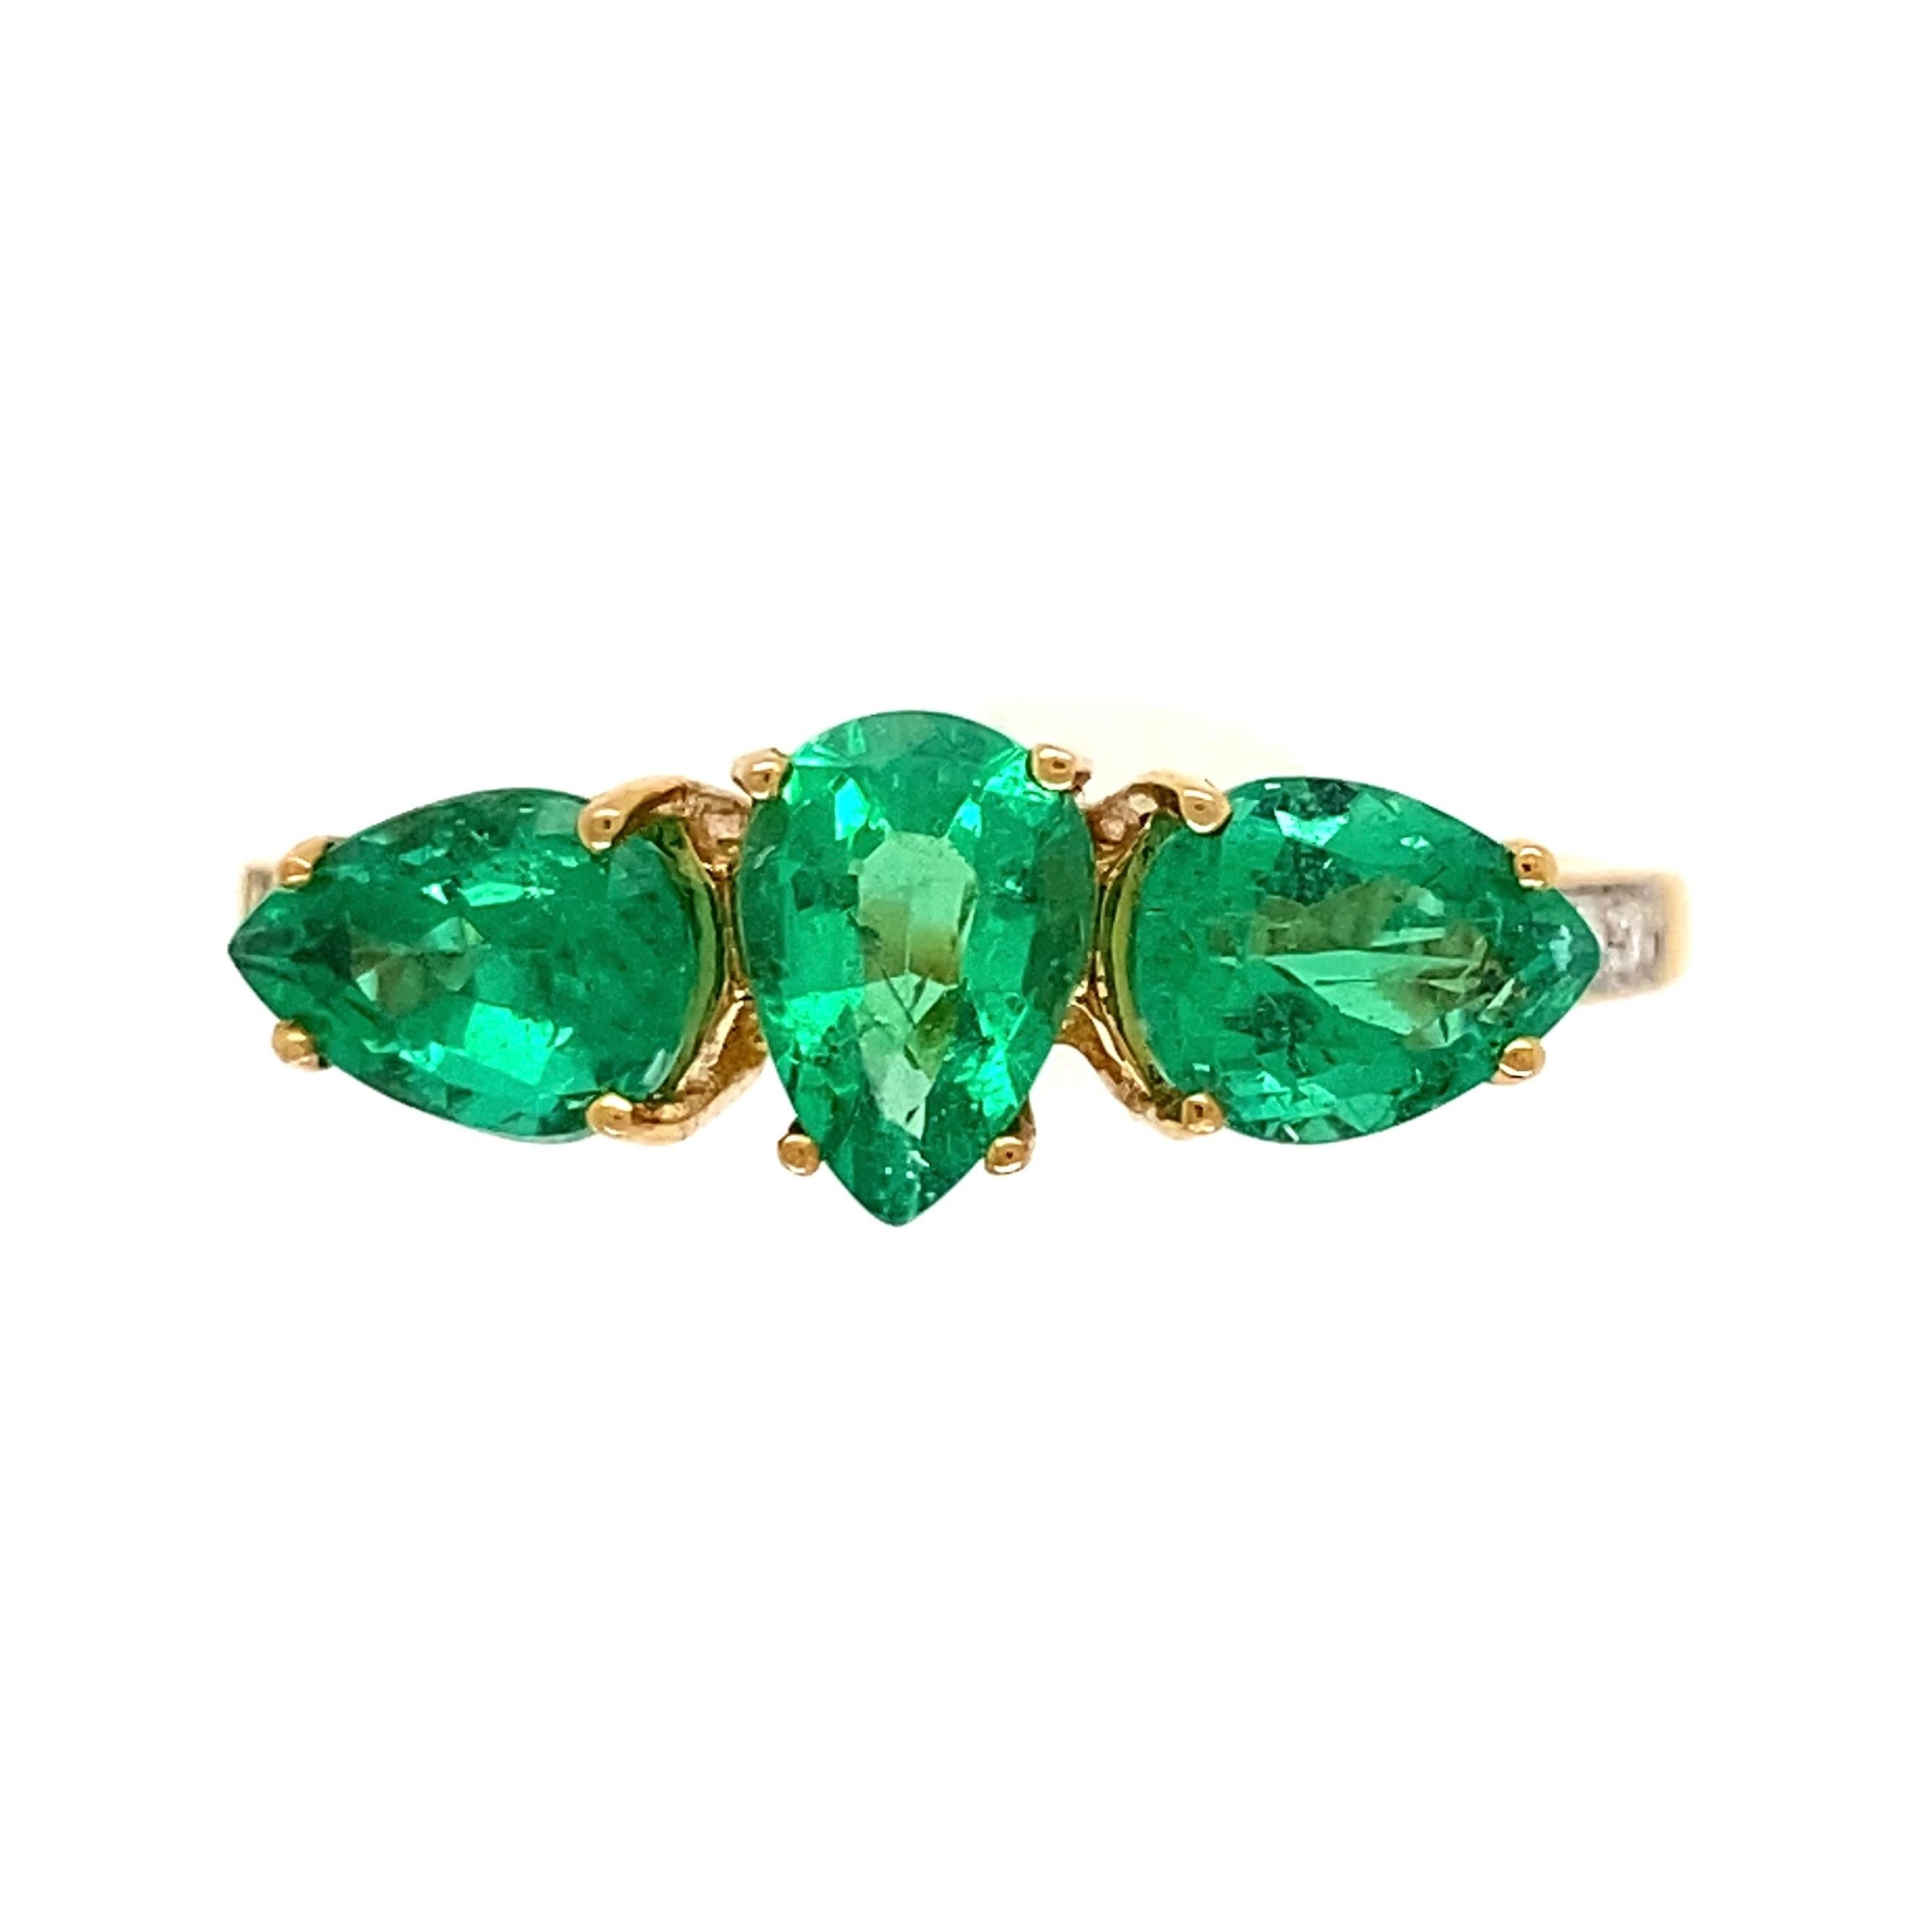 Simply Beautiful! Three-Stone Emerald and Diamond Ring. Securely Hand set with 3 Ethiopian Emeralds, weighing approx. 2.14tcw and Diamonds on either side of shank, weighing approx.0.04tcw. Dimensions 1.09